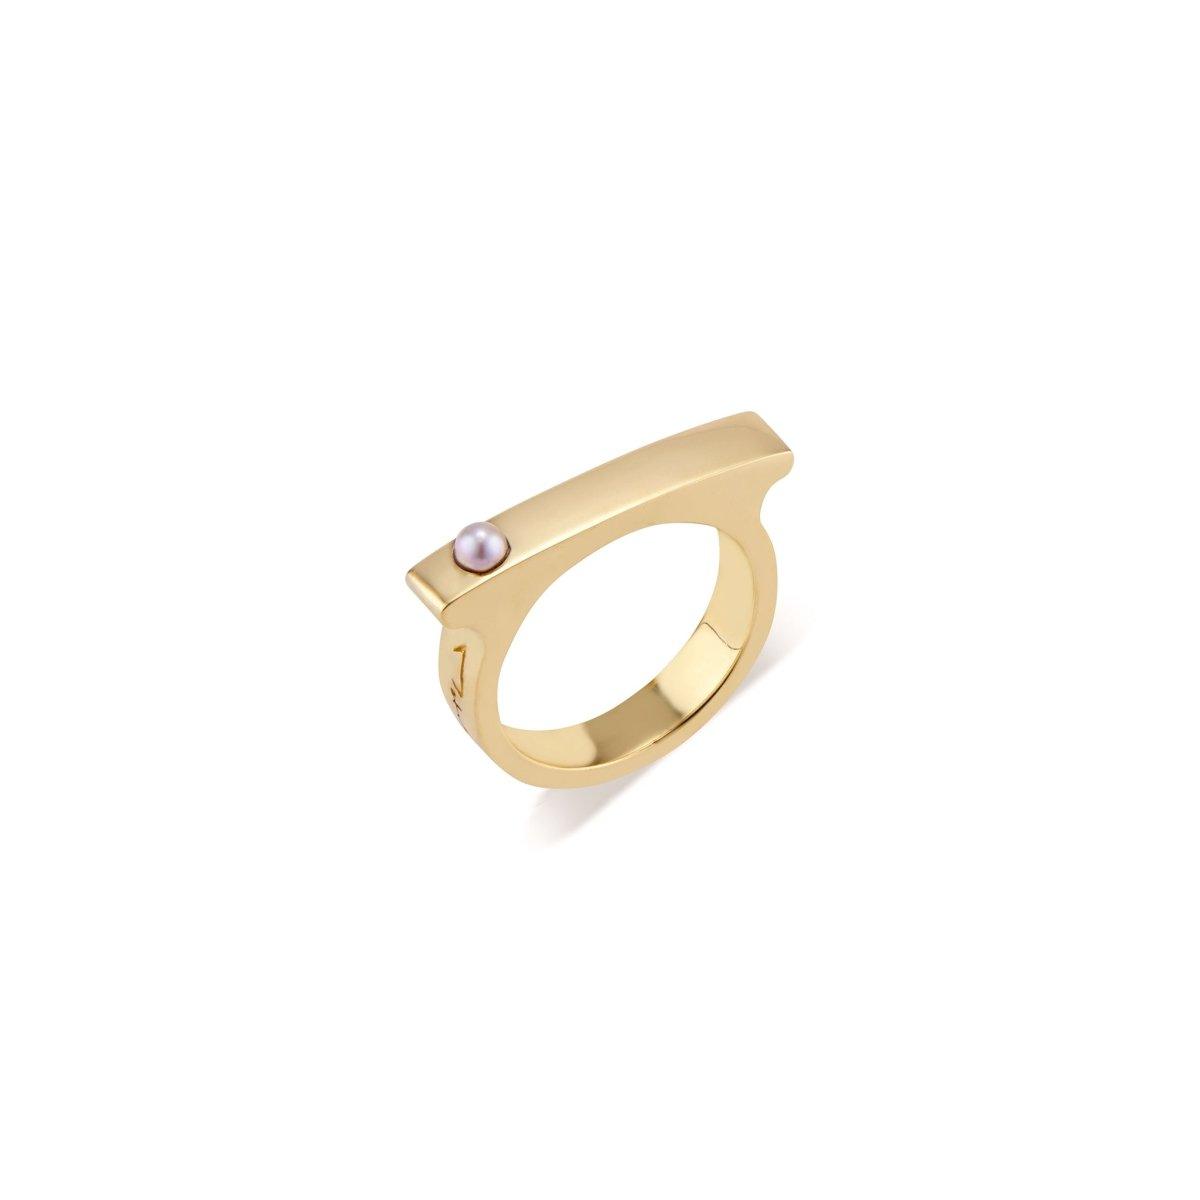 Pearl Mini Matchstick Ring - Nataly Aponte